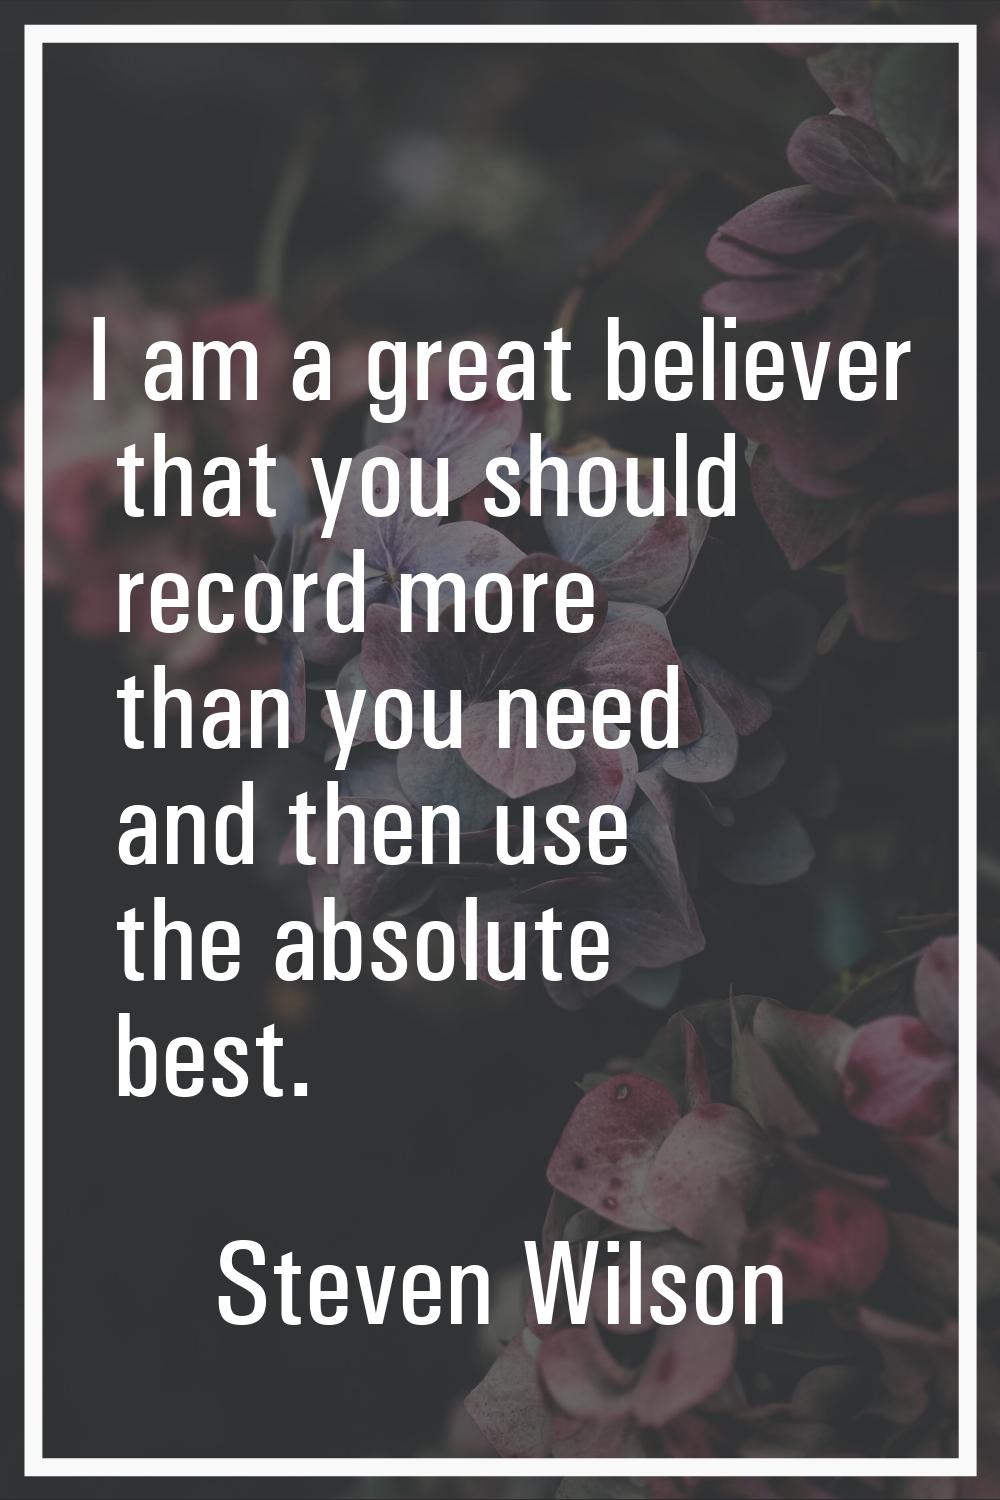 I am a great believer that you should record more than you need and then use the absolute best.